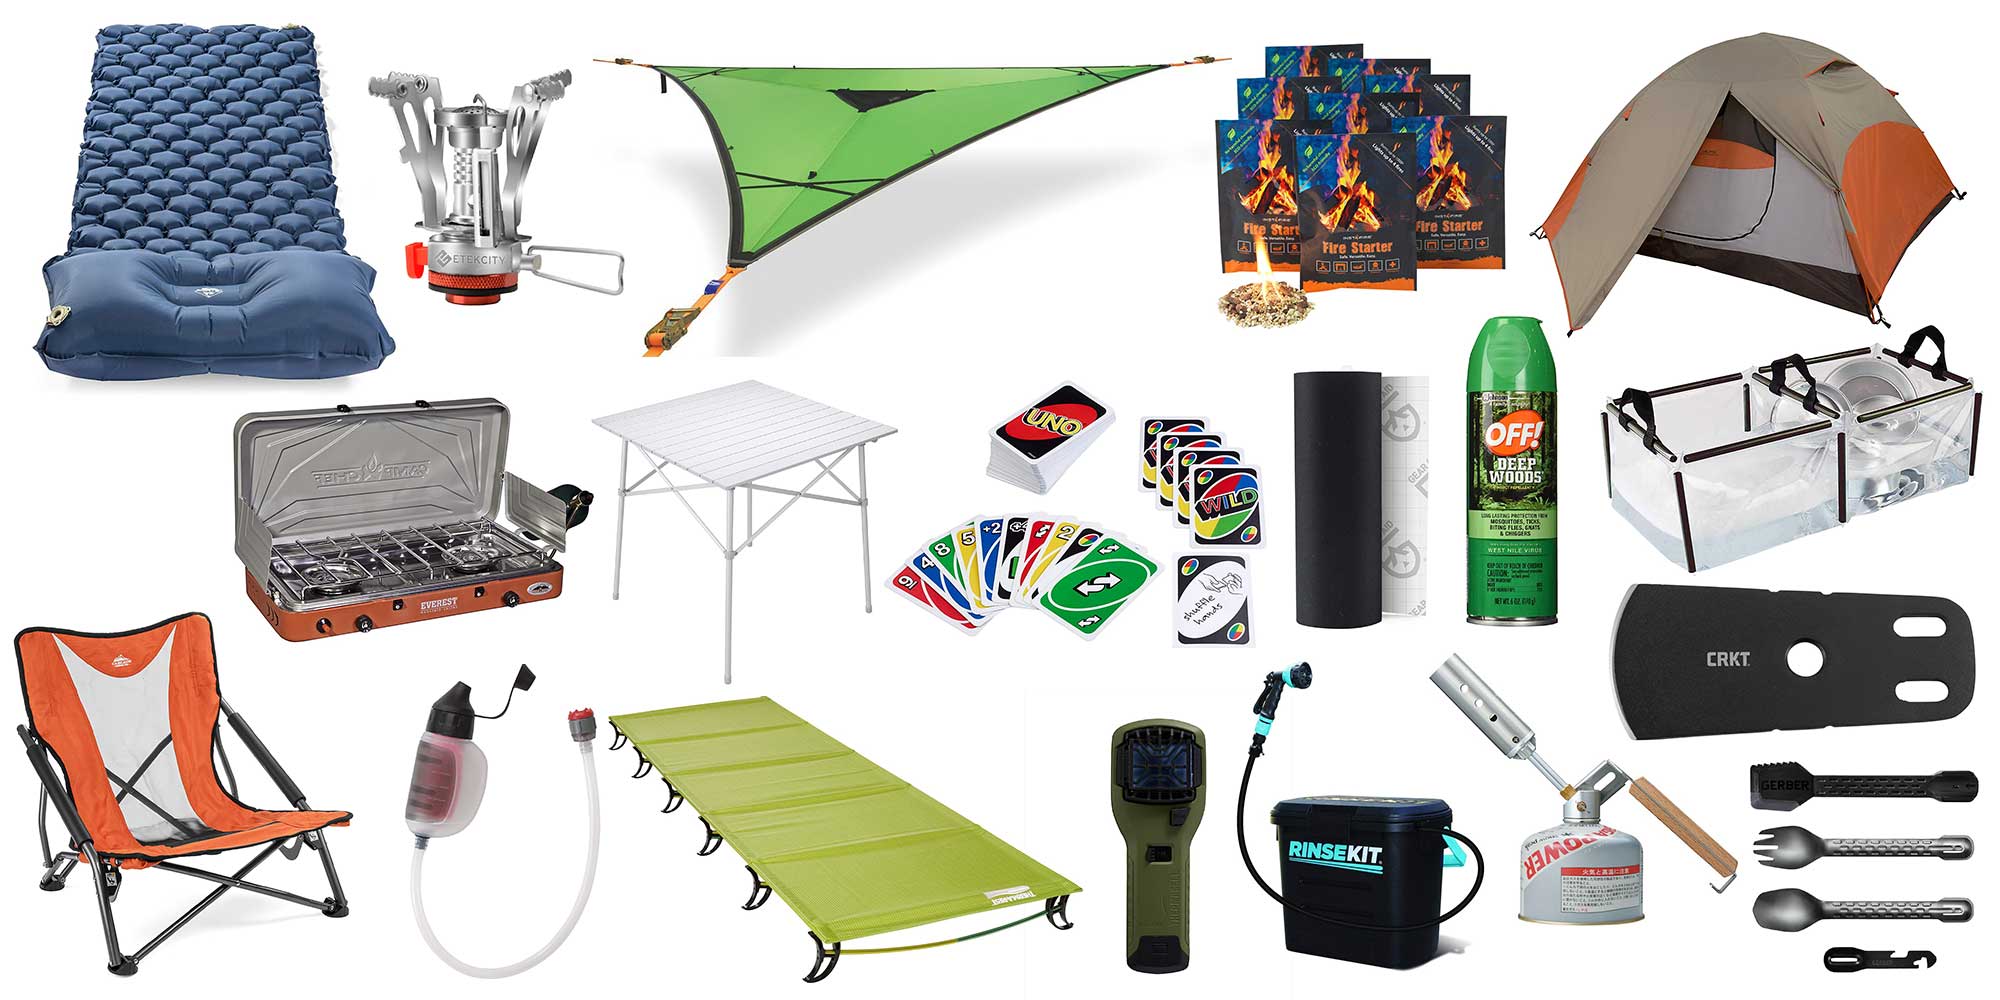 Affordable Quality Camp Supplies II, camp supplies